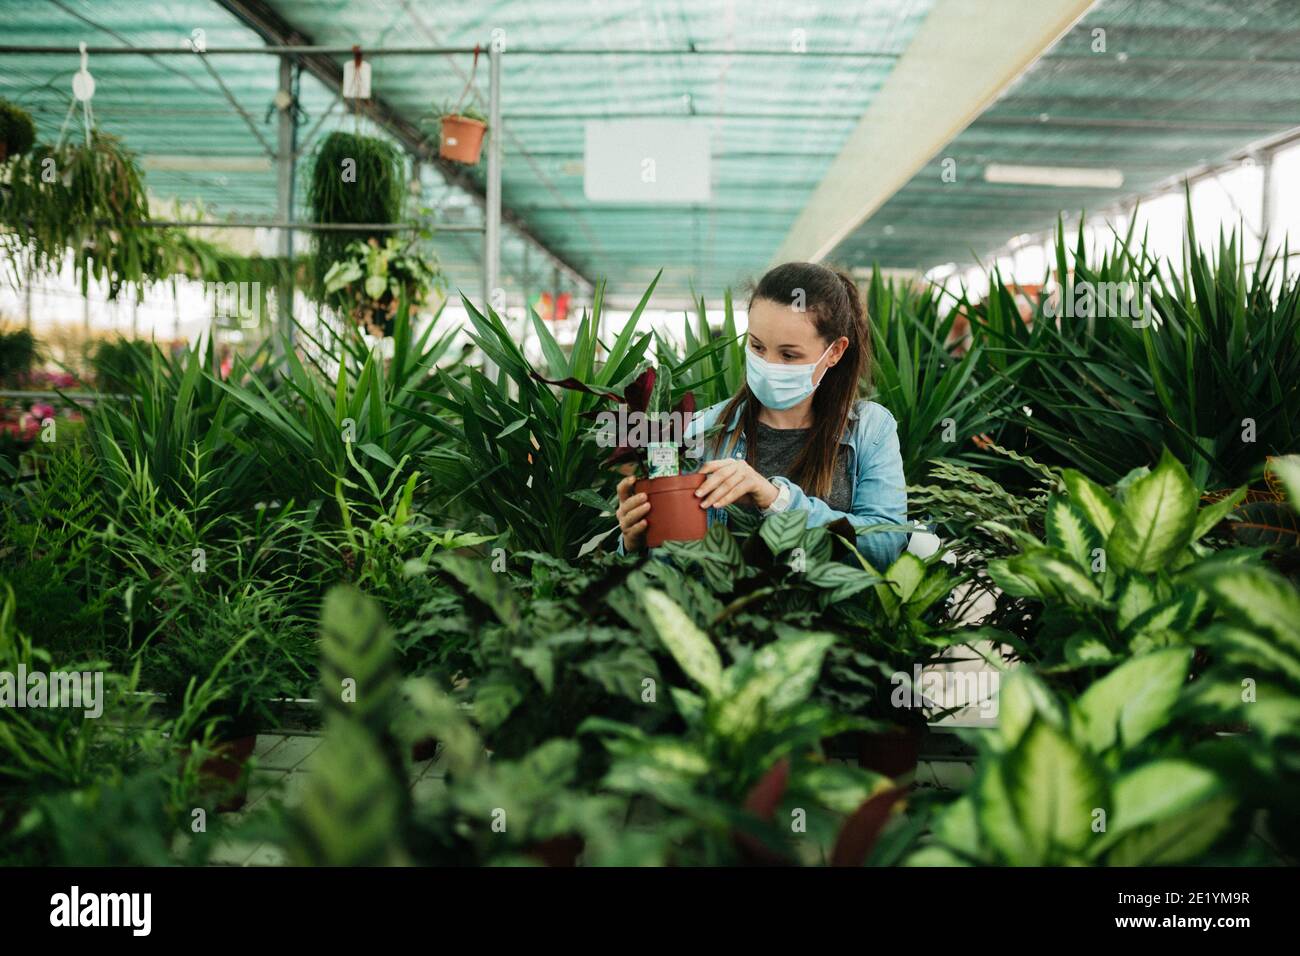 Girl in mask holding plants in a garden Stock Photo